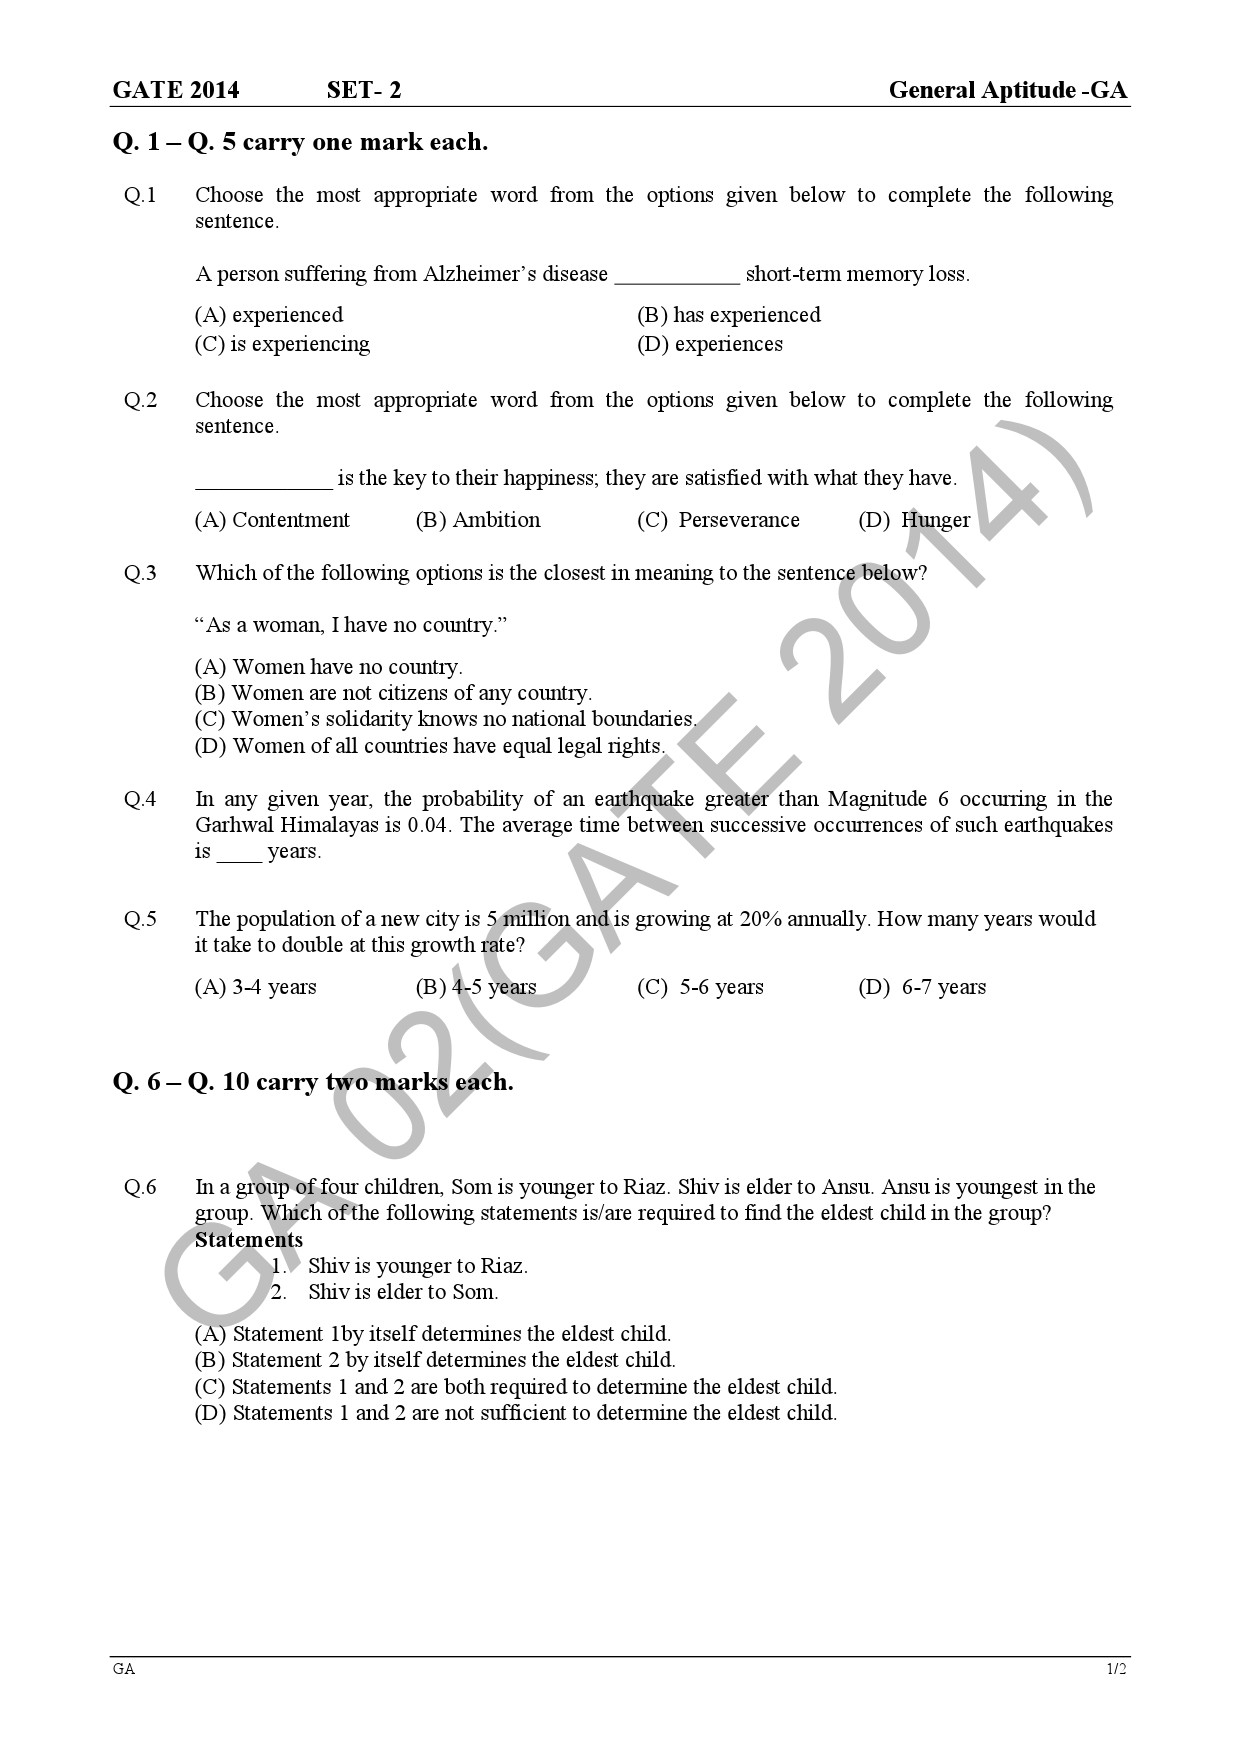 GATE Exam Question Paper 2014 Mining Engineering 5